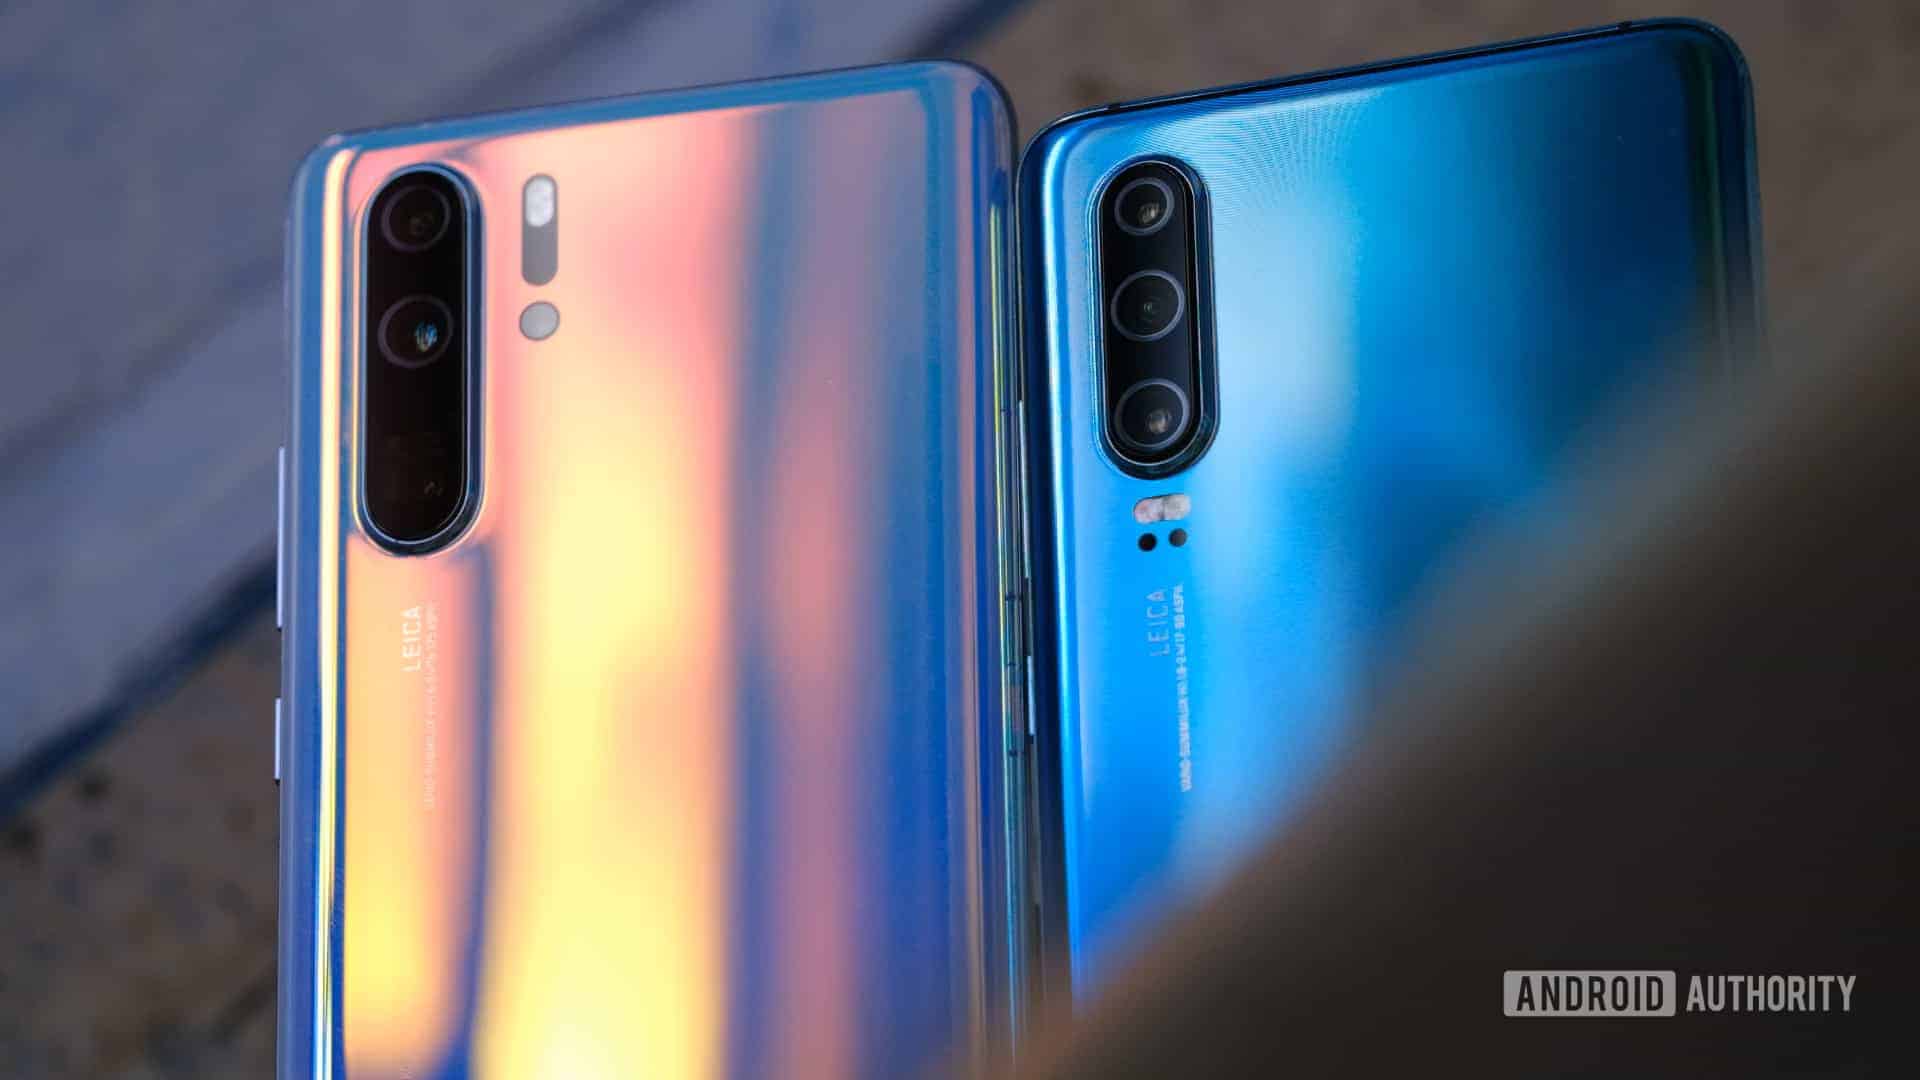 HUAWEI P30 and P30 Pro update 